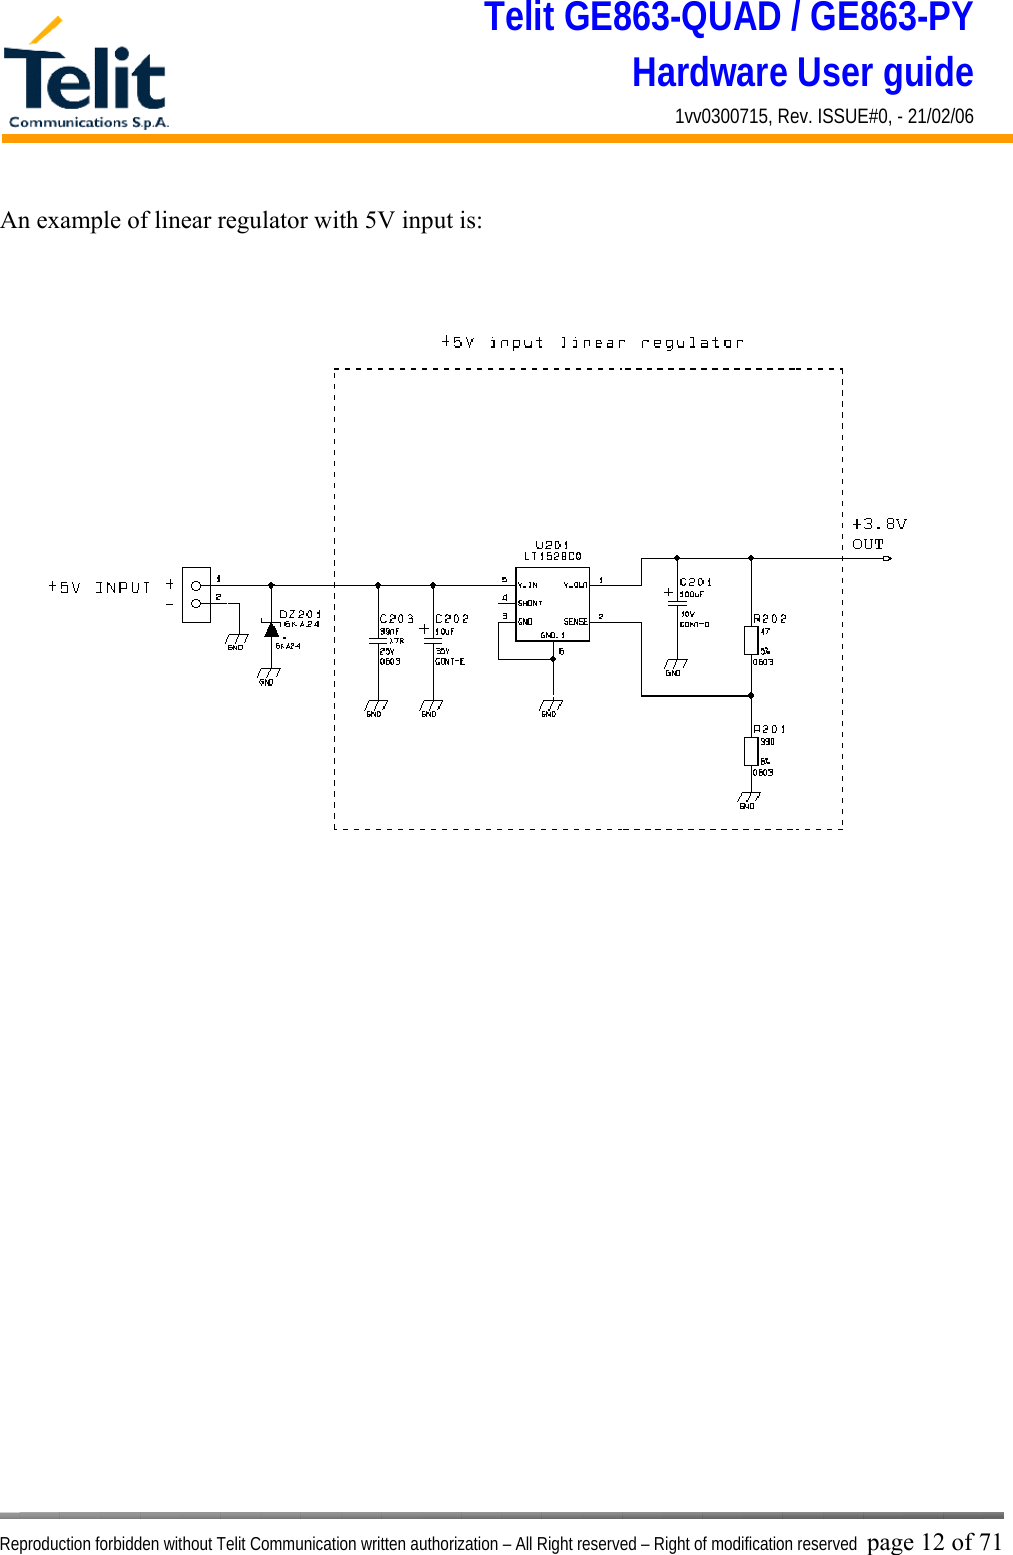 Telit GE863-QUAD / GE863-PY Hardware User guide 1vv0300715, Rev. ISSUE#0, - 21/02/06    Reproduction forbidden without Telit Communication written authorization – All Right reserved – Right of modification reserved page 12 of 71 An example of linear regulator with 5V input is:                    